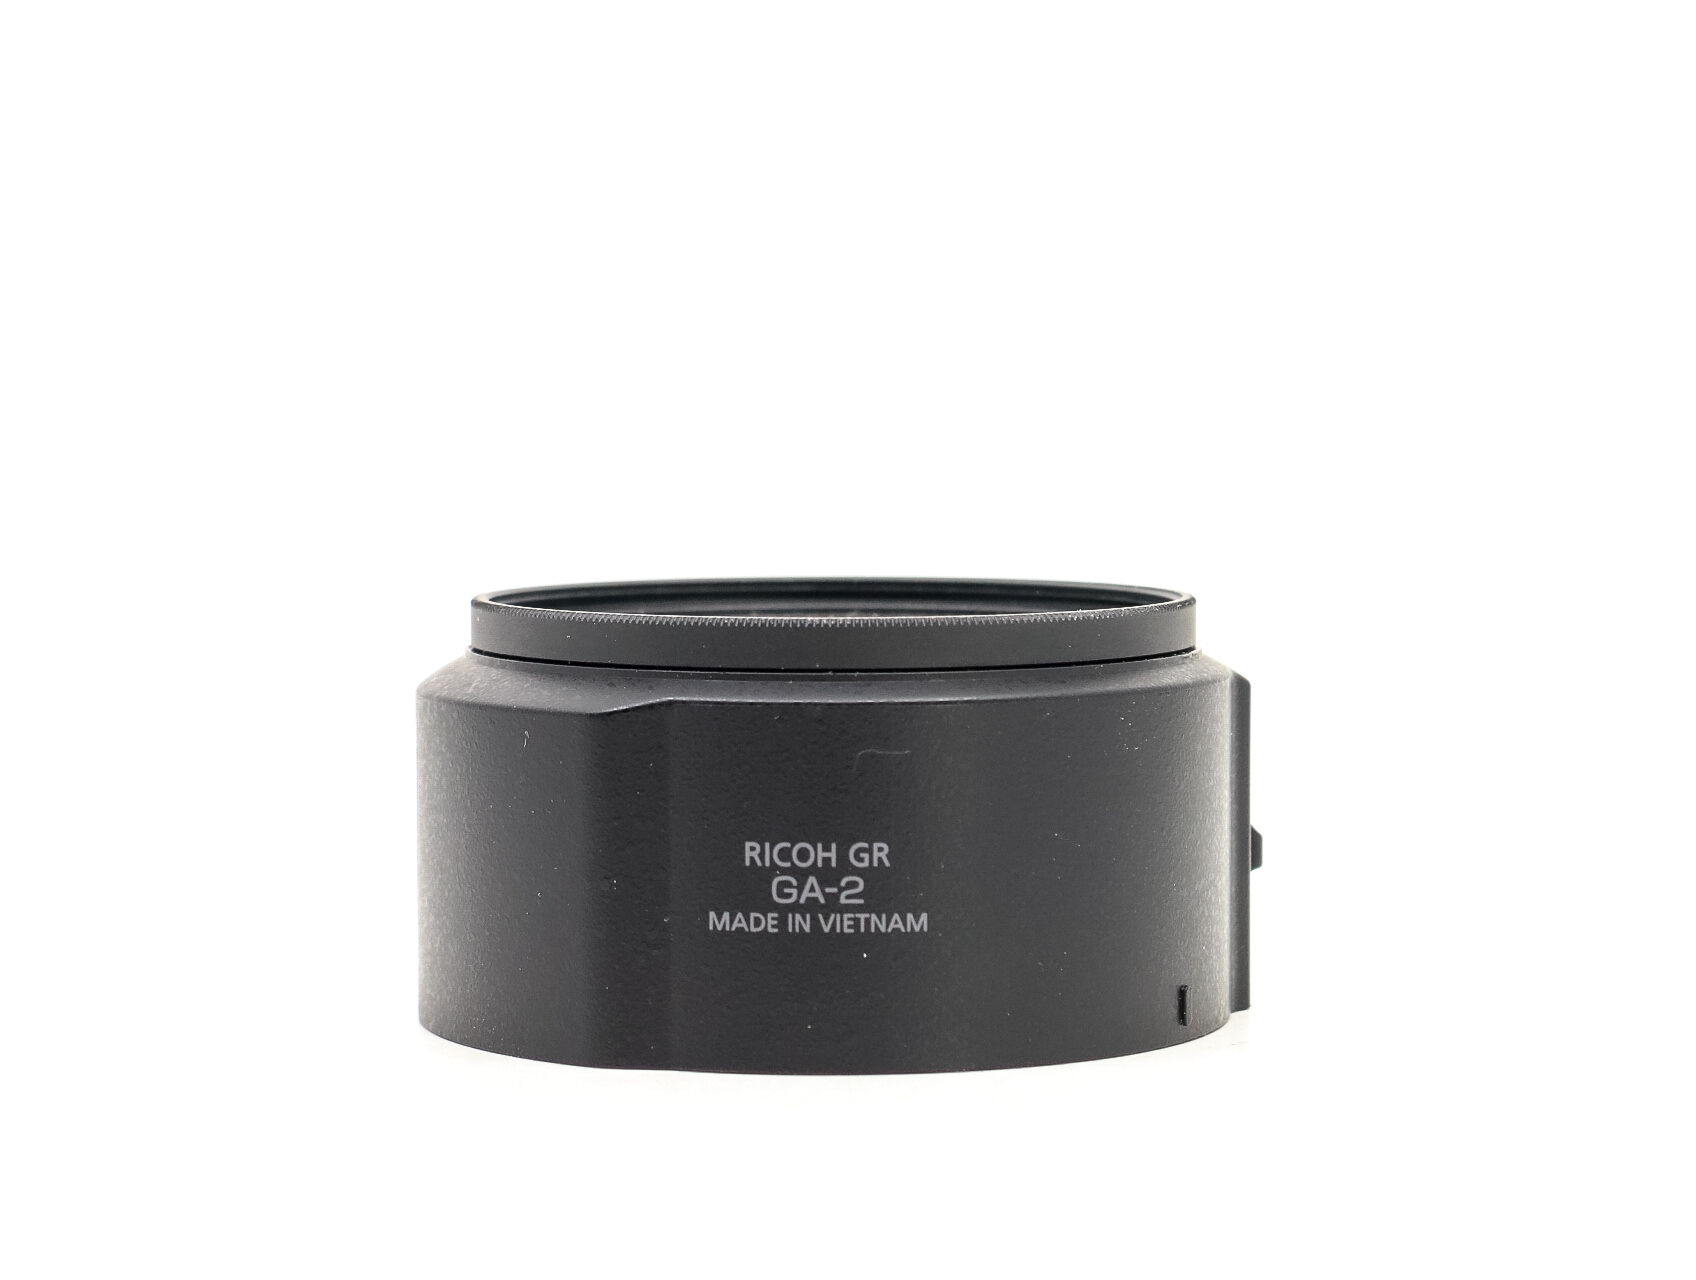 Ricoh GA-2 Lens Adapter (Condition: Like New)